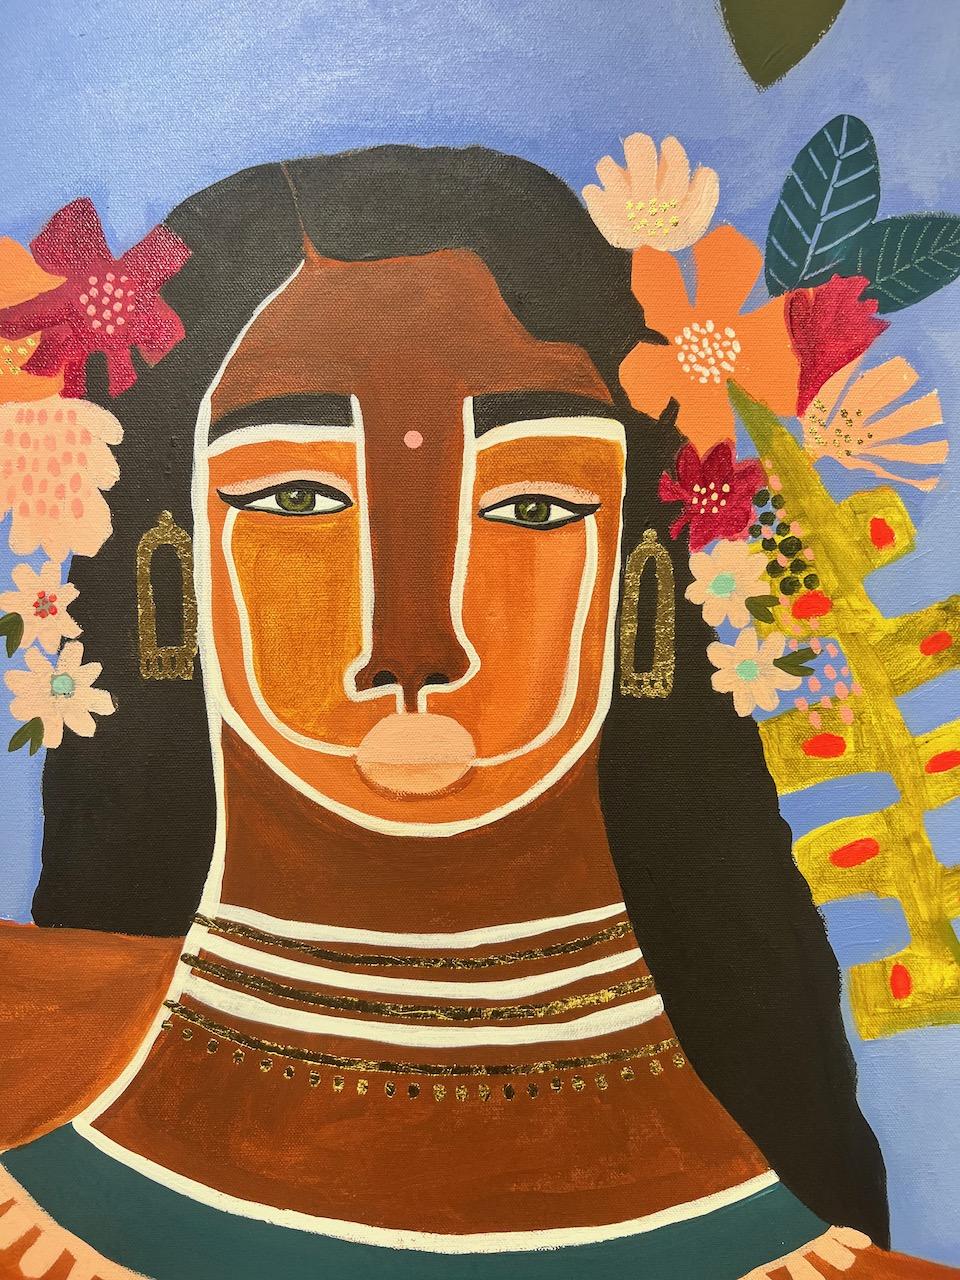 Lily Sol’s current work “Flower Goddess” is a symbol of blooming into her true self and honoring the divine femine energy within all of us. Through her paintings she is able to celebrate the fierce women in her life and shine light on the diverse